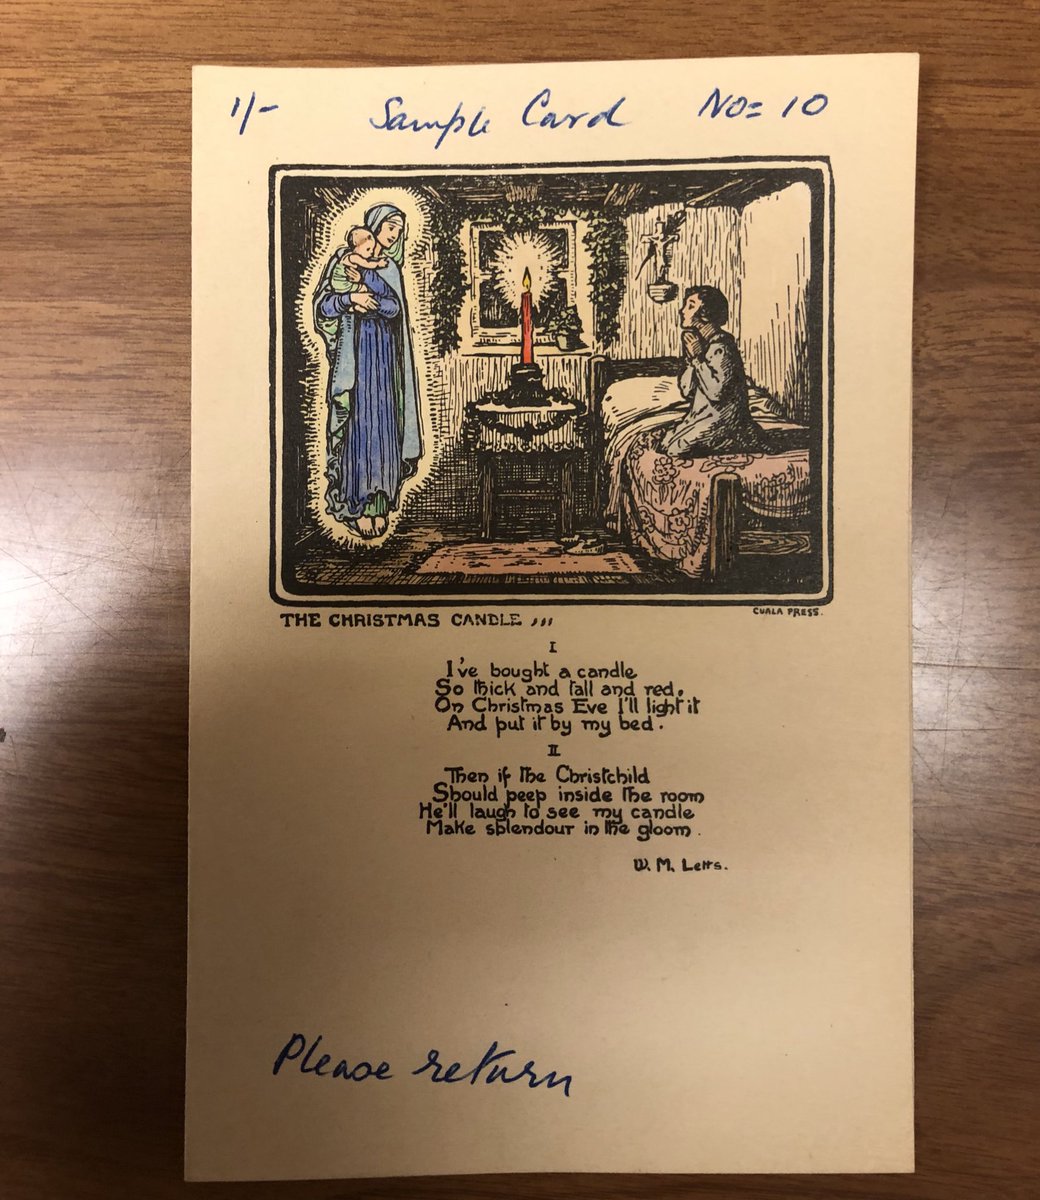 Today’s #ArchiveAdventCalendar is  #Candles with a Cuala Press Print by Beatrice Moss Campbell (Lady Glenavy) #VirtualTrinityLibrary #CualaPress